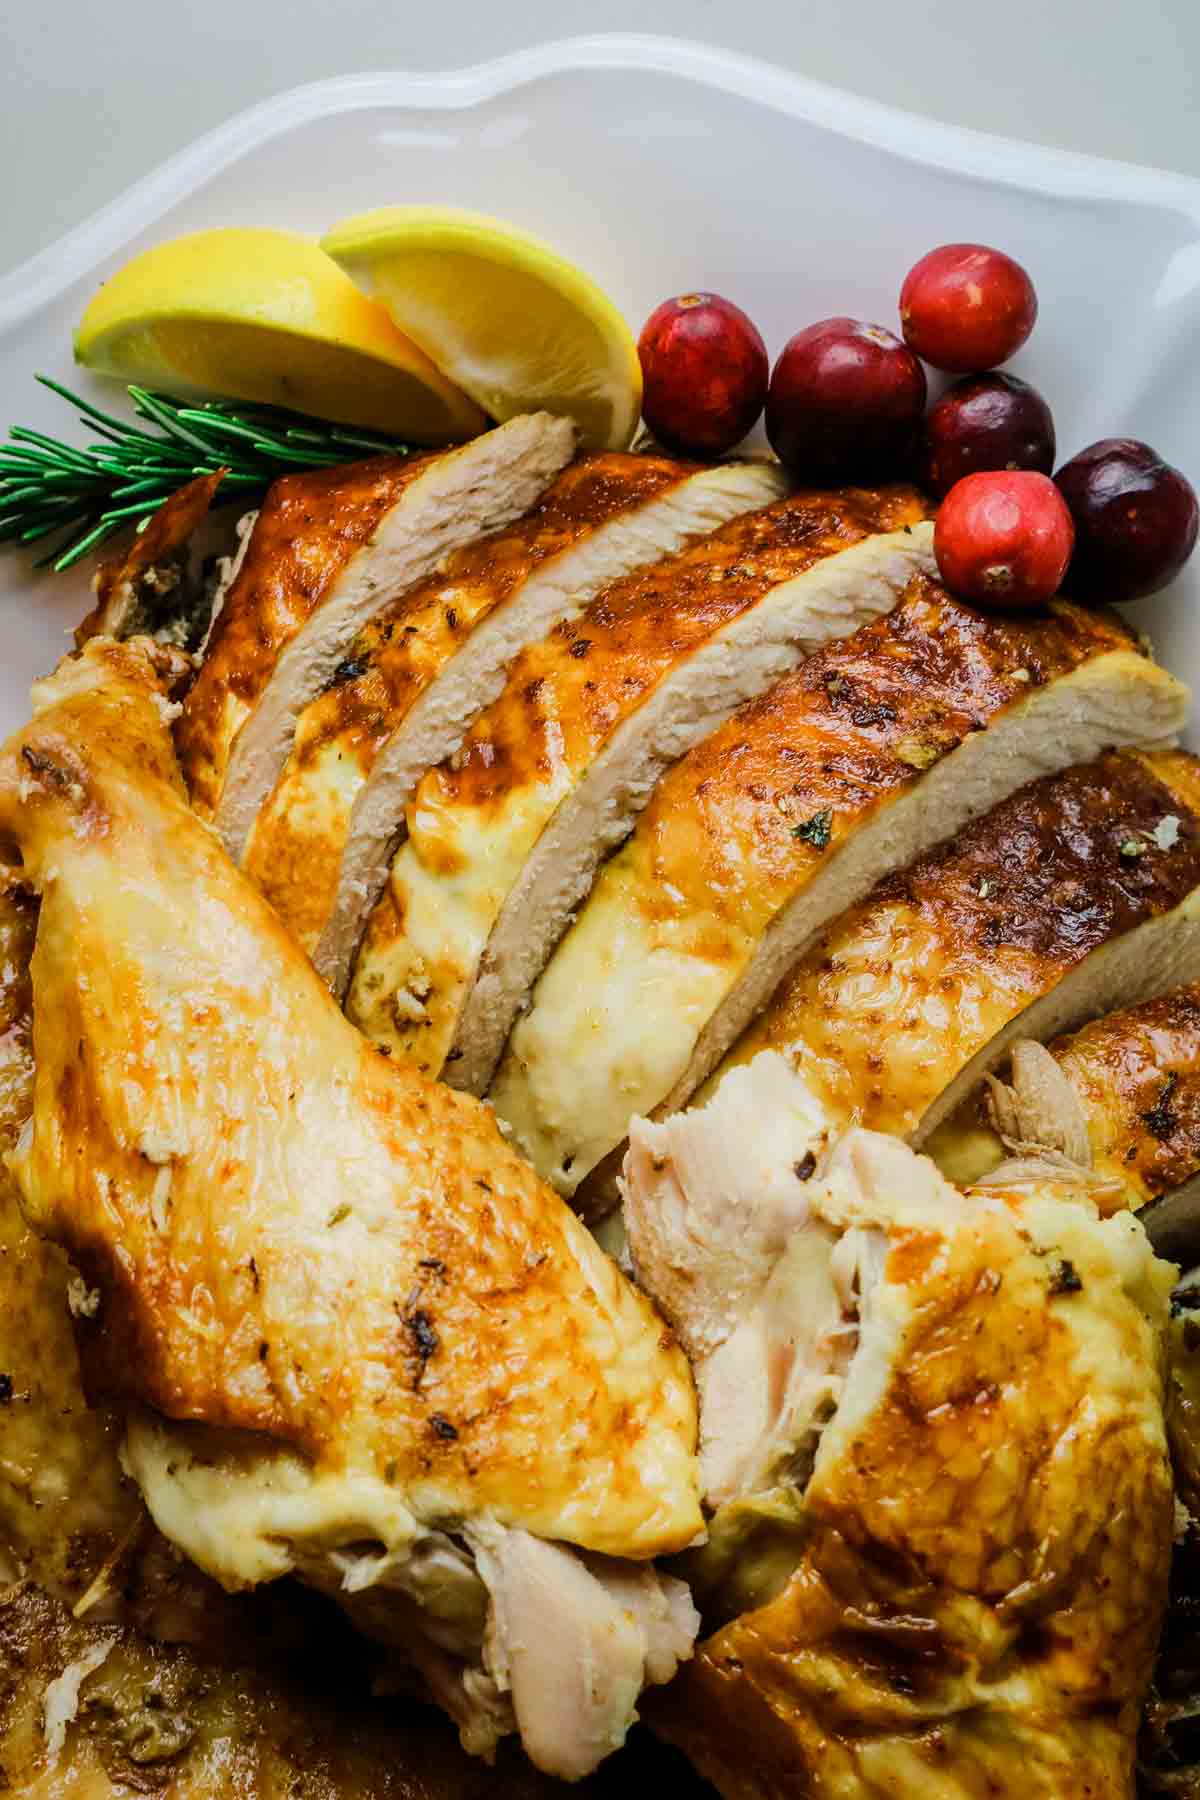 carved turkey with cranberries and lemon wedges.